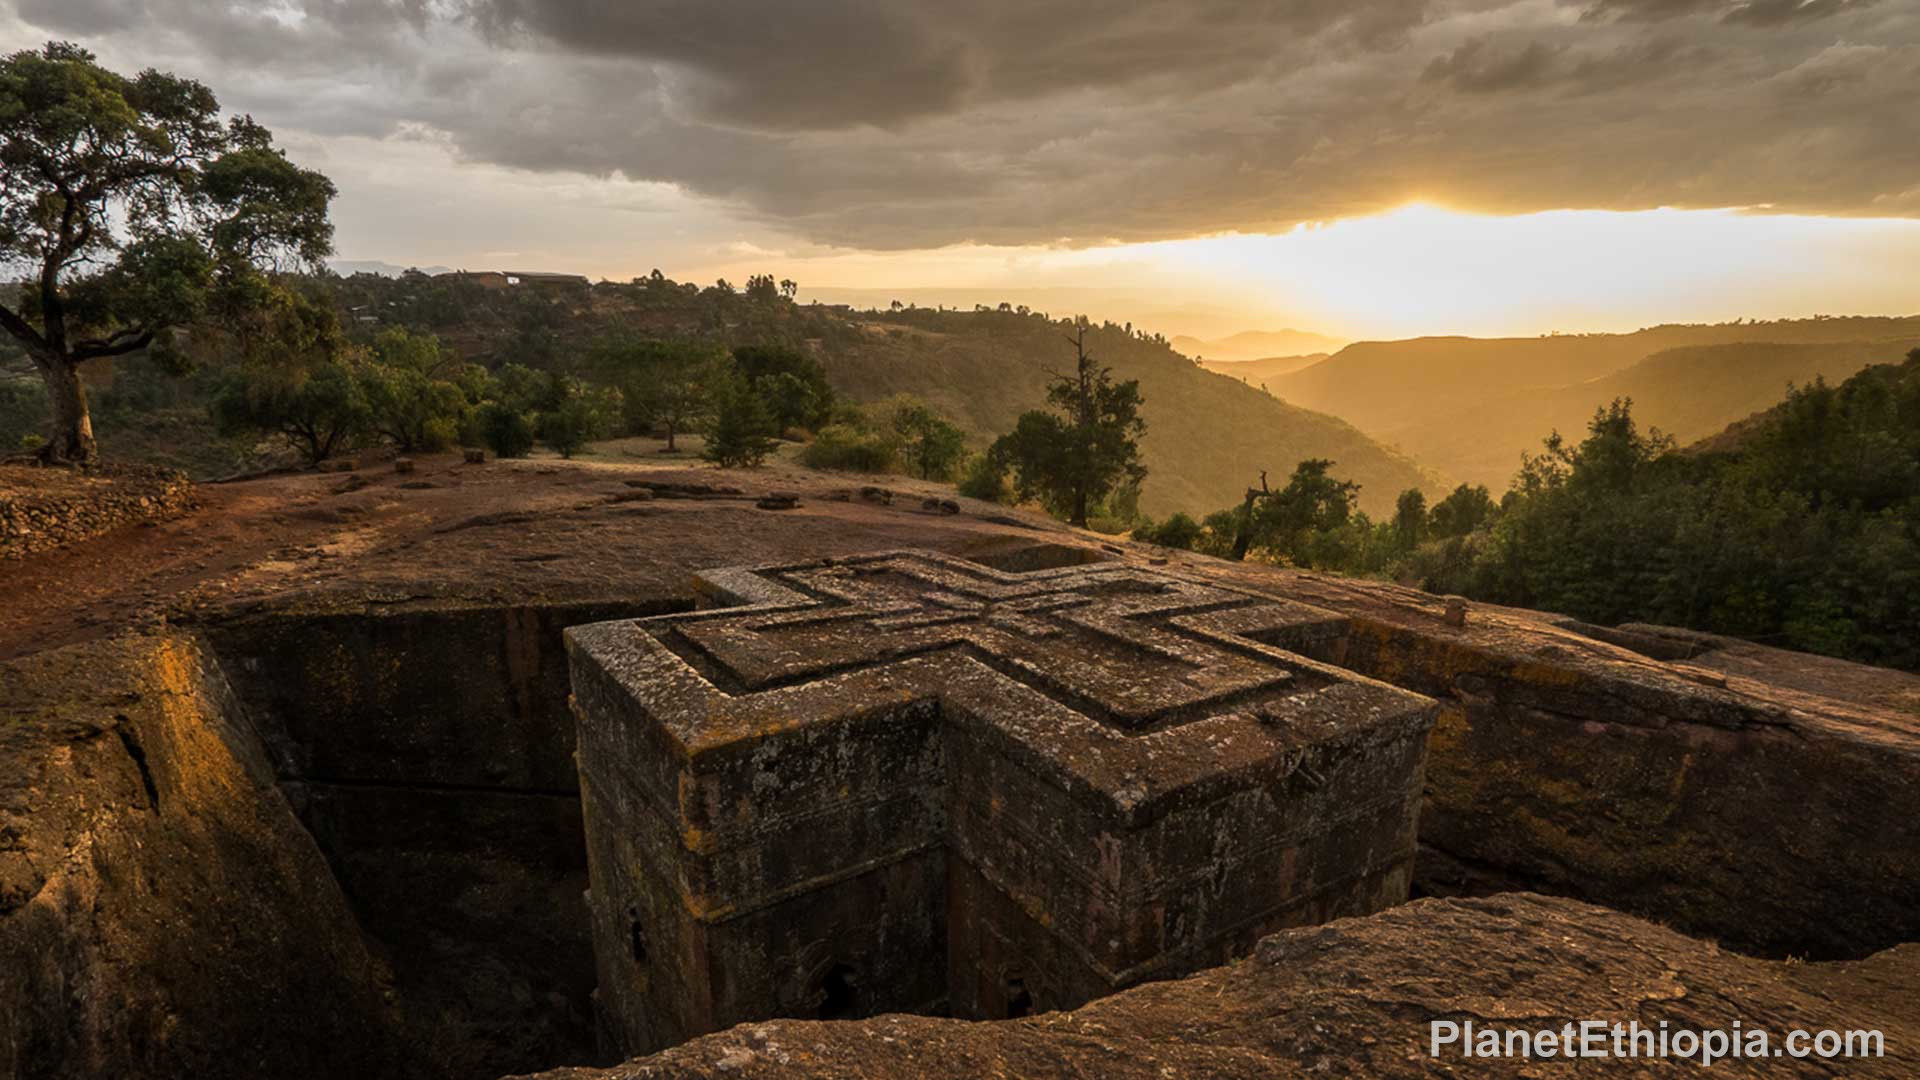 350 Ethiopia Pictures  Download Free Images on Unsplash